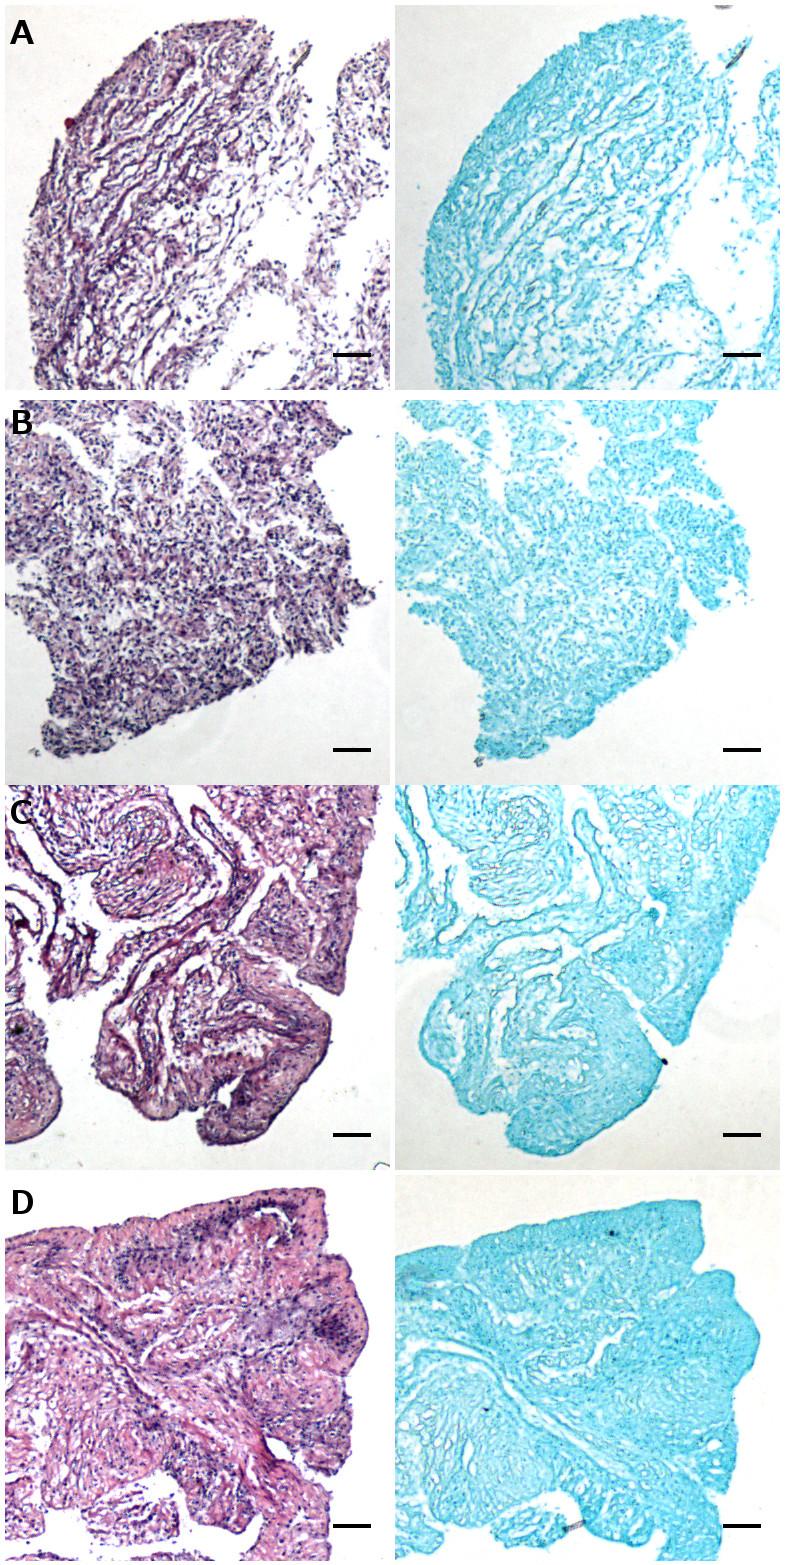 Figure 3.13: Donor 6 SM MPC constructs stained with H&E (left) and Alcian blue (right).